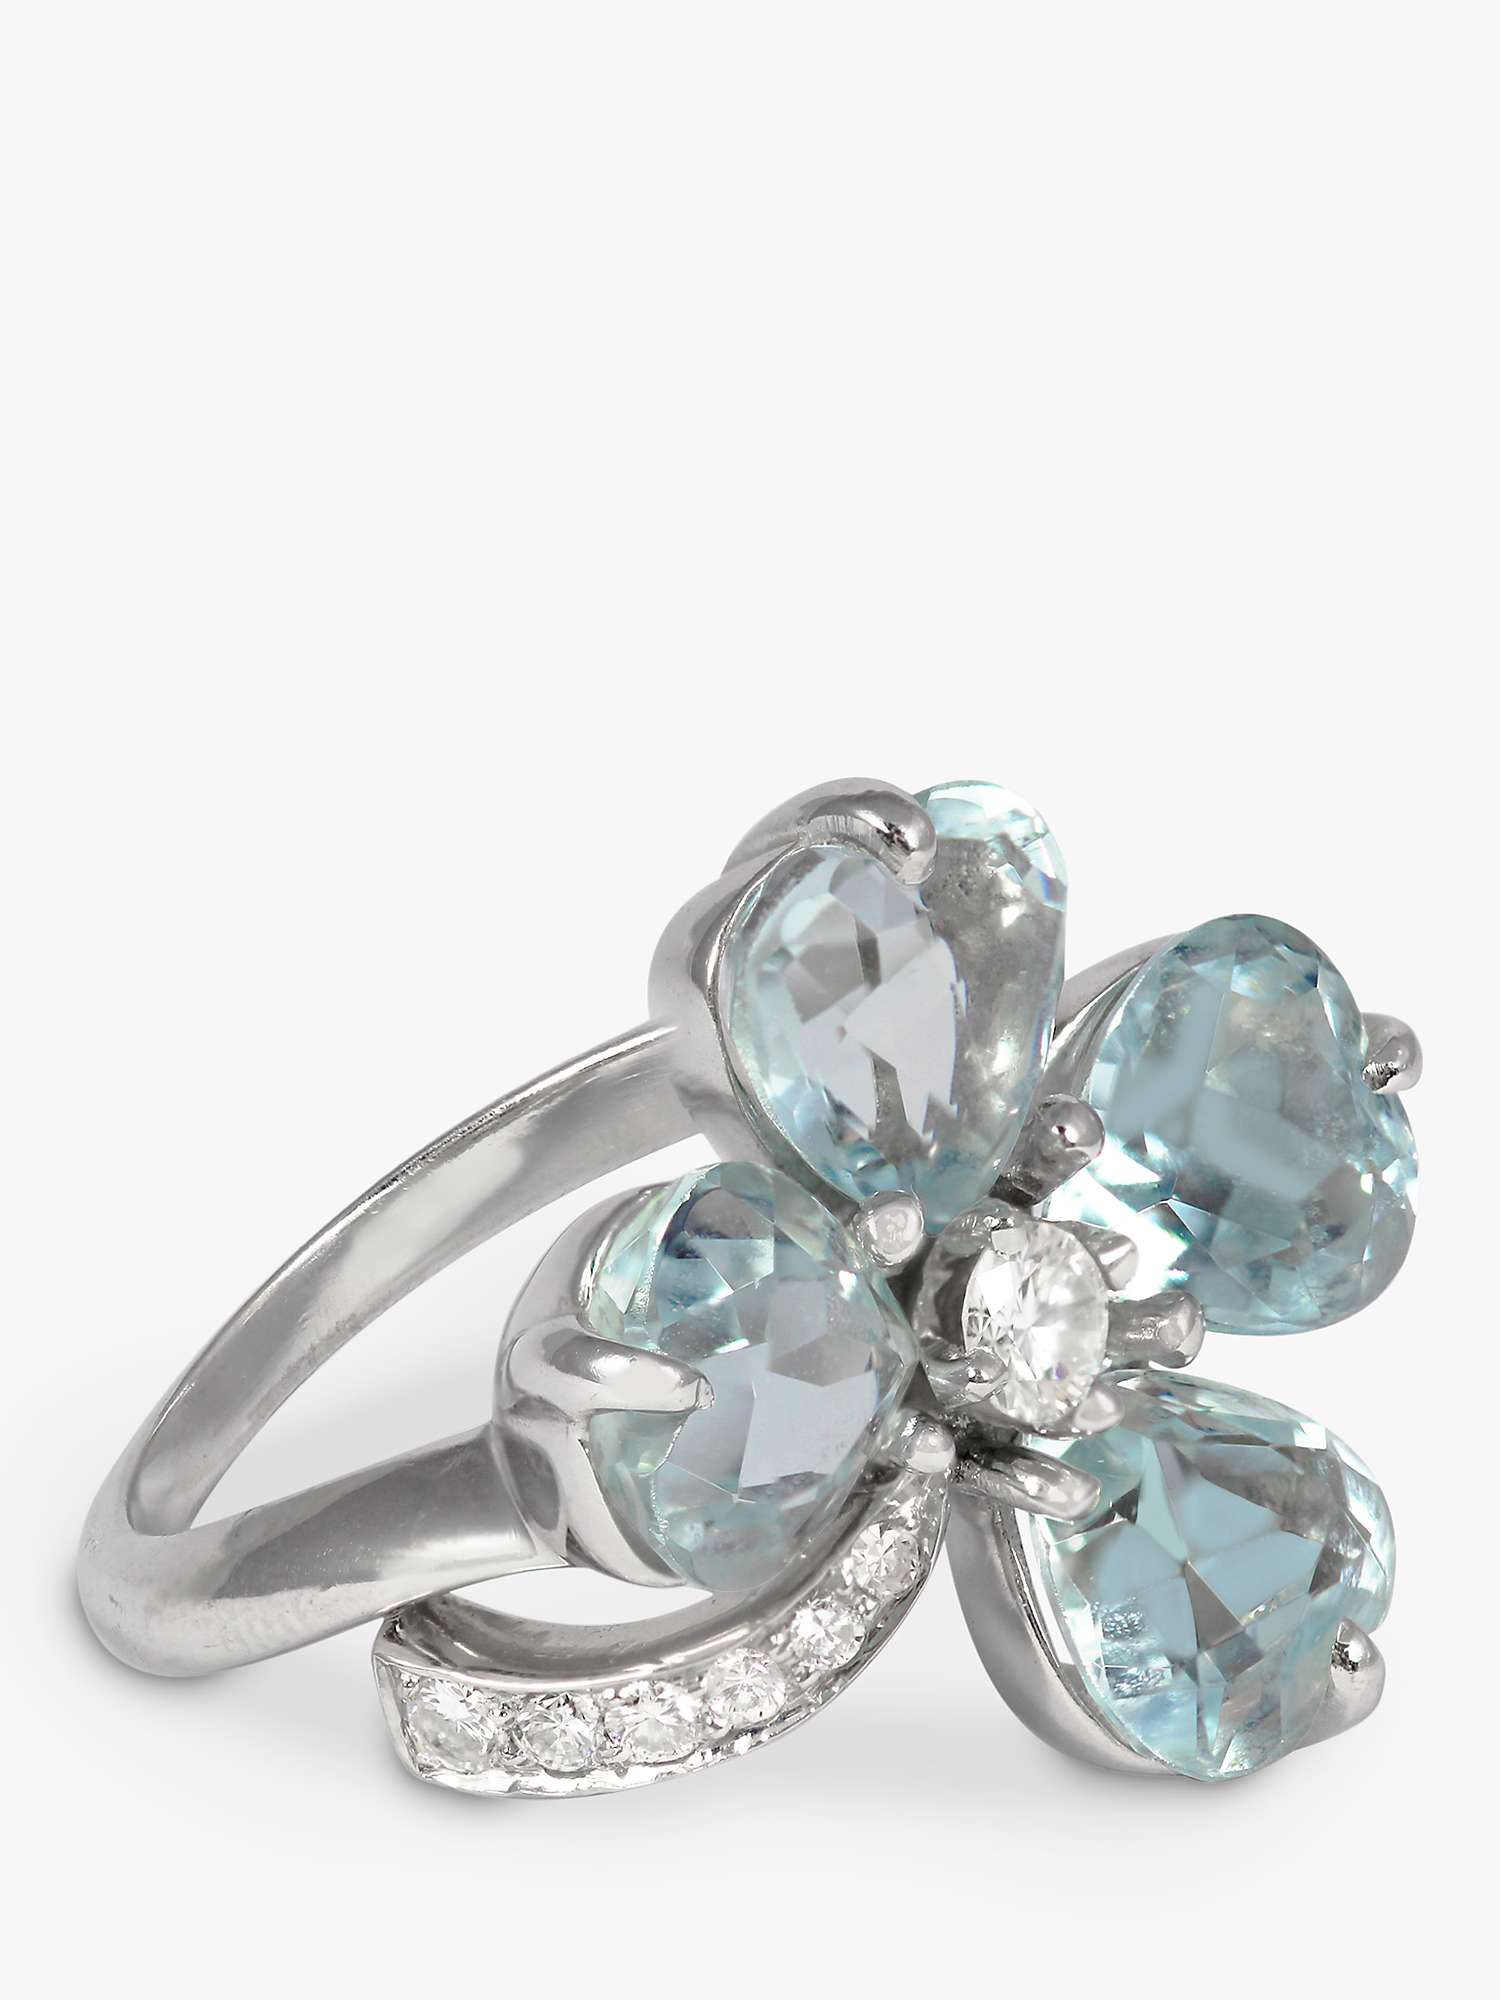 Buy Kojis 14ct White Gold Diamond and Aquamarine Second Hand Four Leaf Clover Ring Online at johnlewis.com